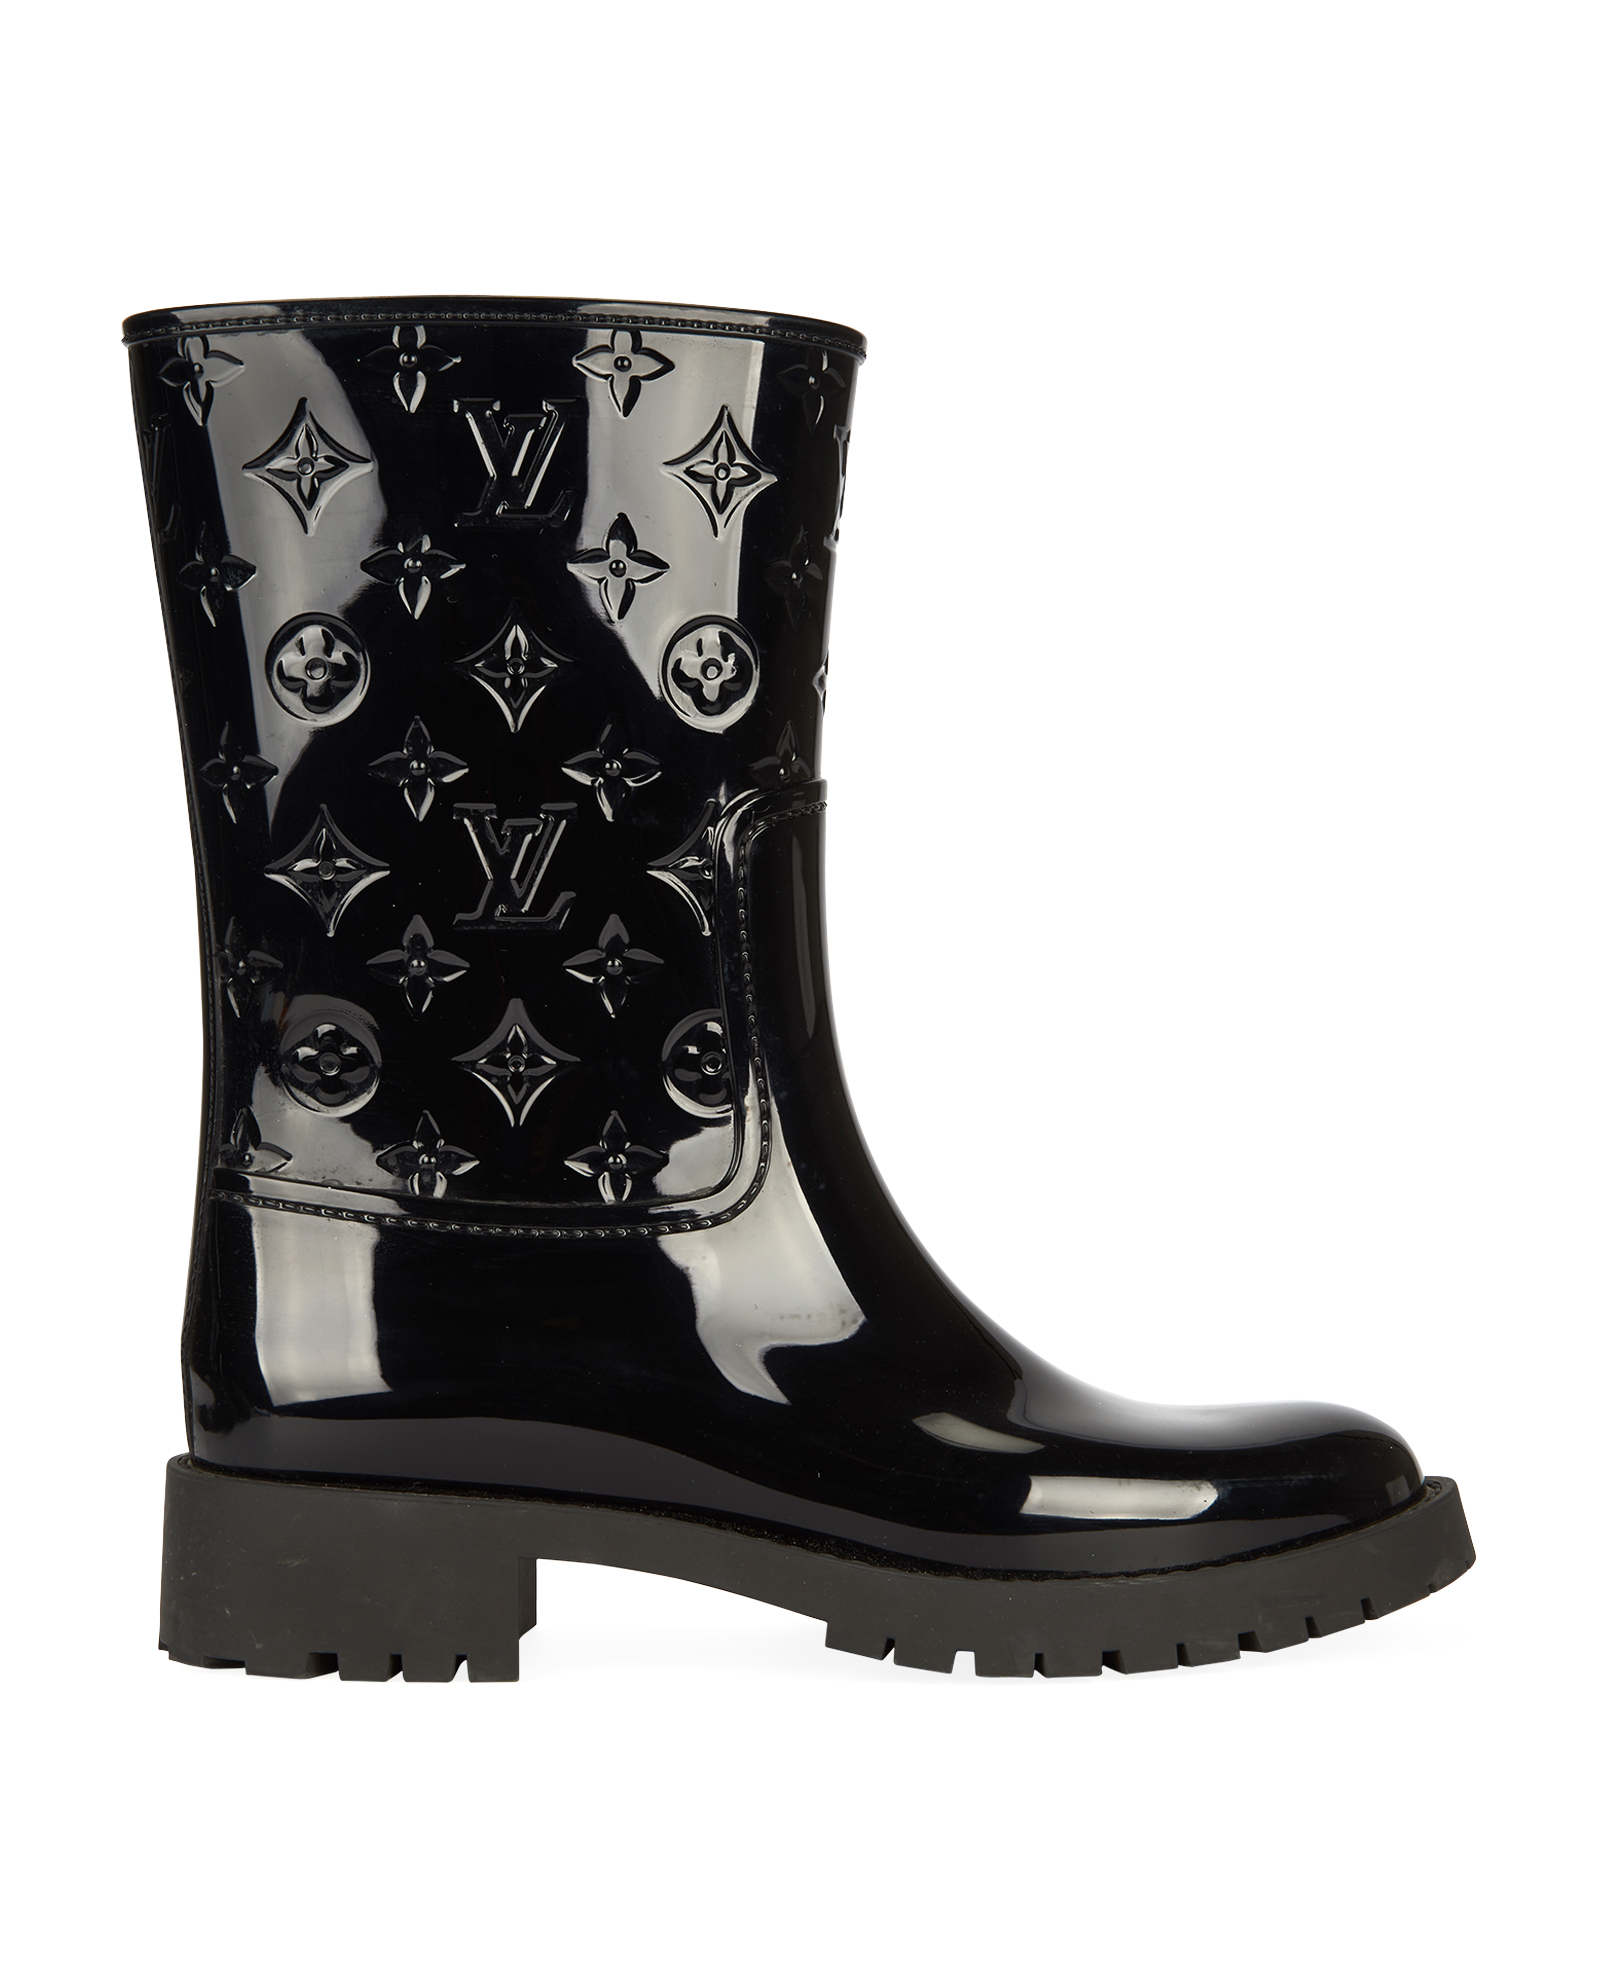 A Day in the Life: Louis Vuitton Wellies